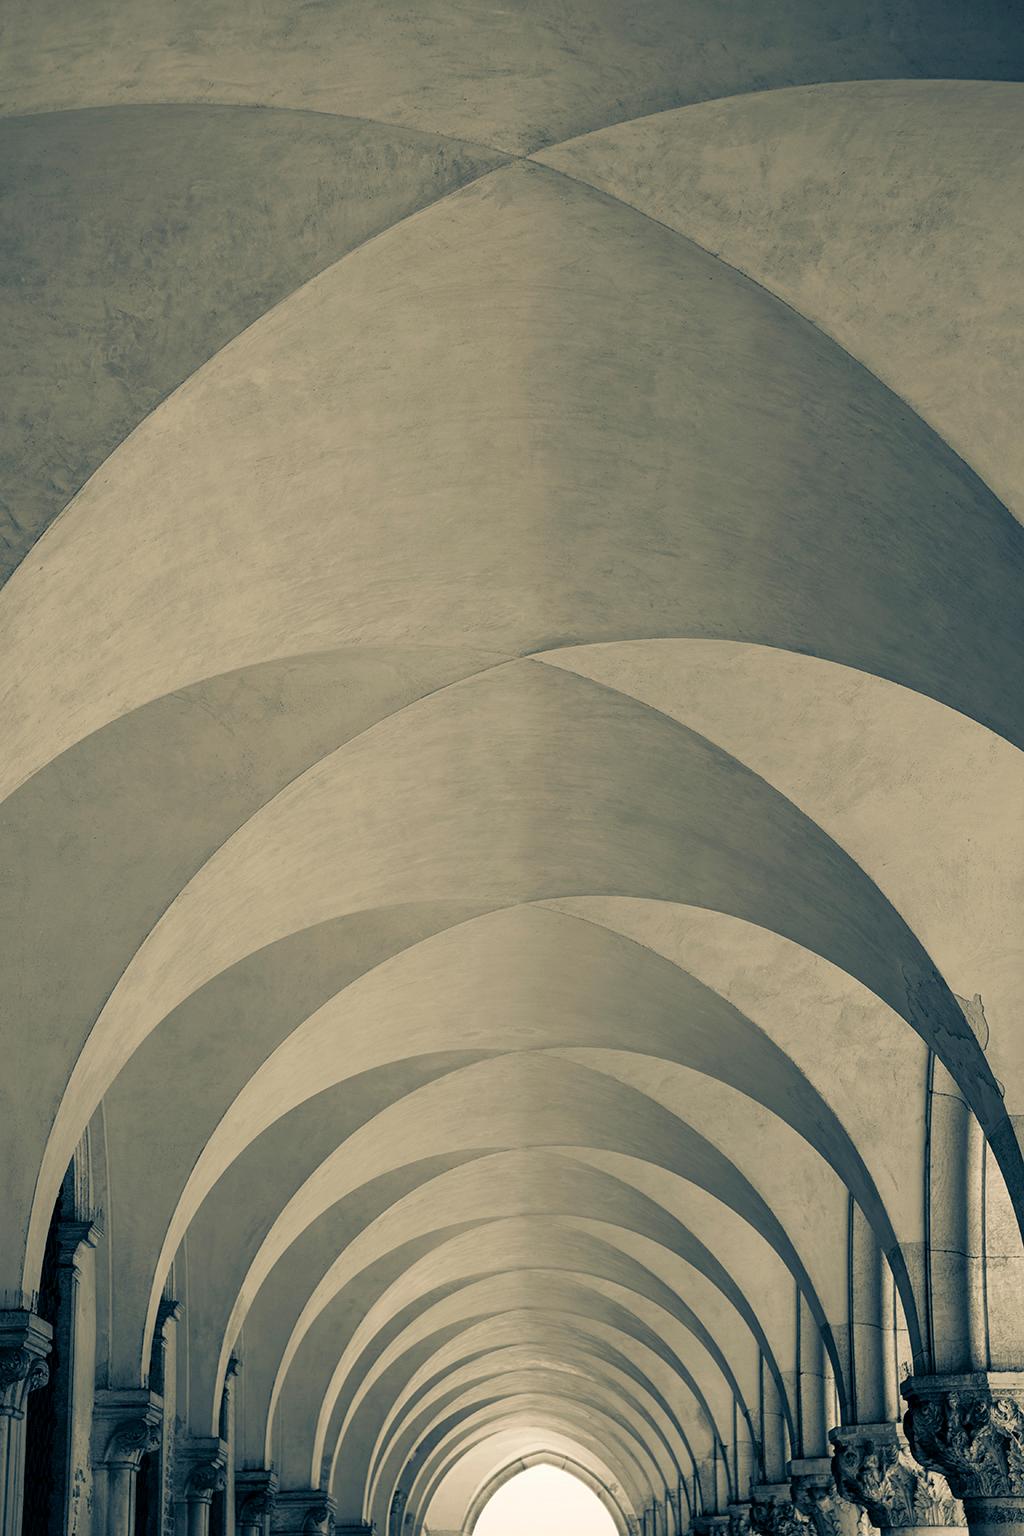  Cosmo Condina Landscape Photograph - Doges Palace Colonnade, Venice, Italy 2018